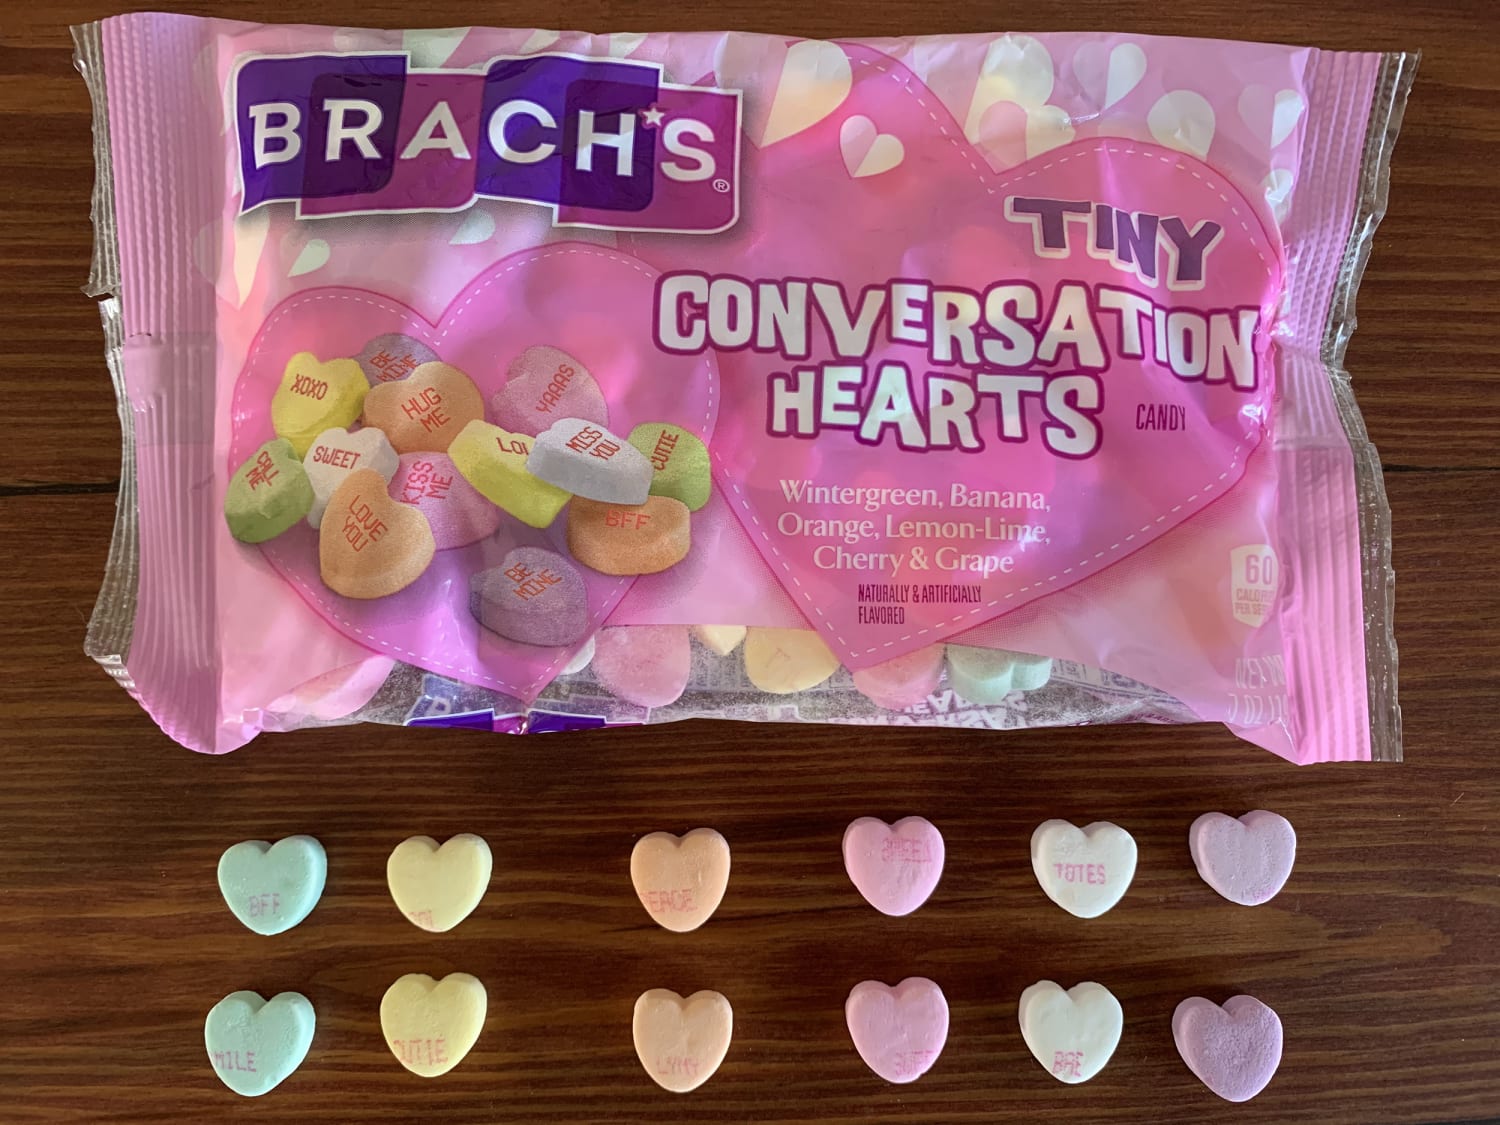 Which brand makes the best conversation hearts for Valentine's Day?